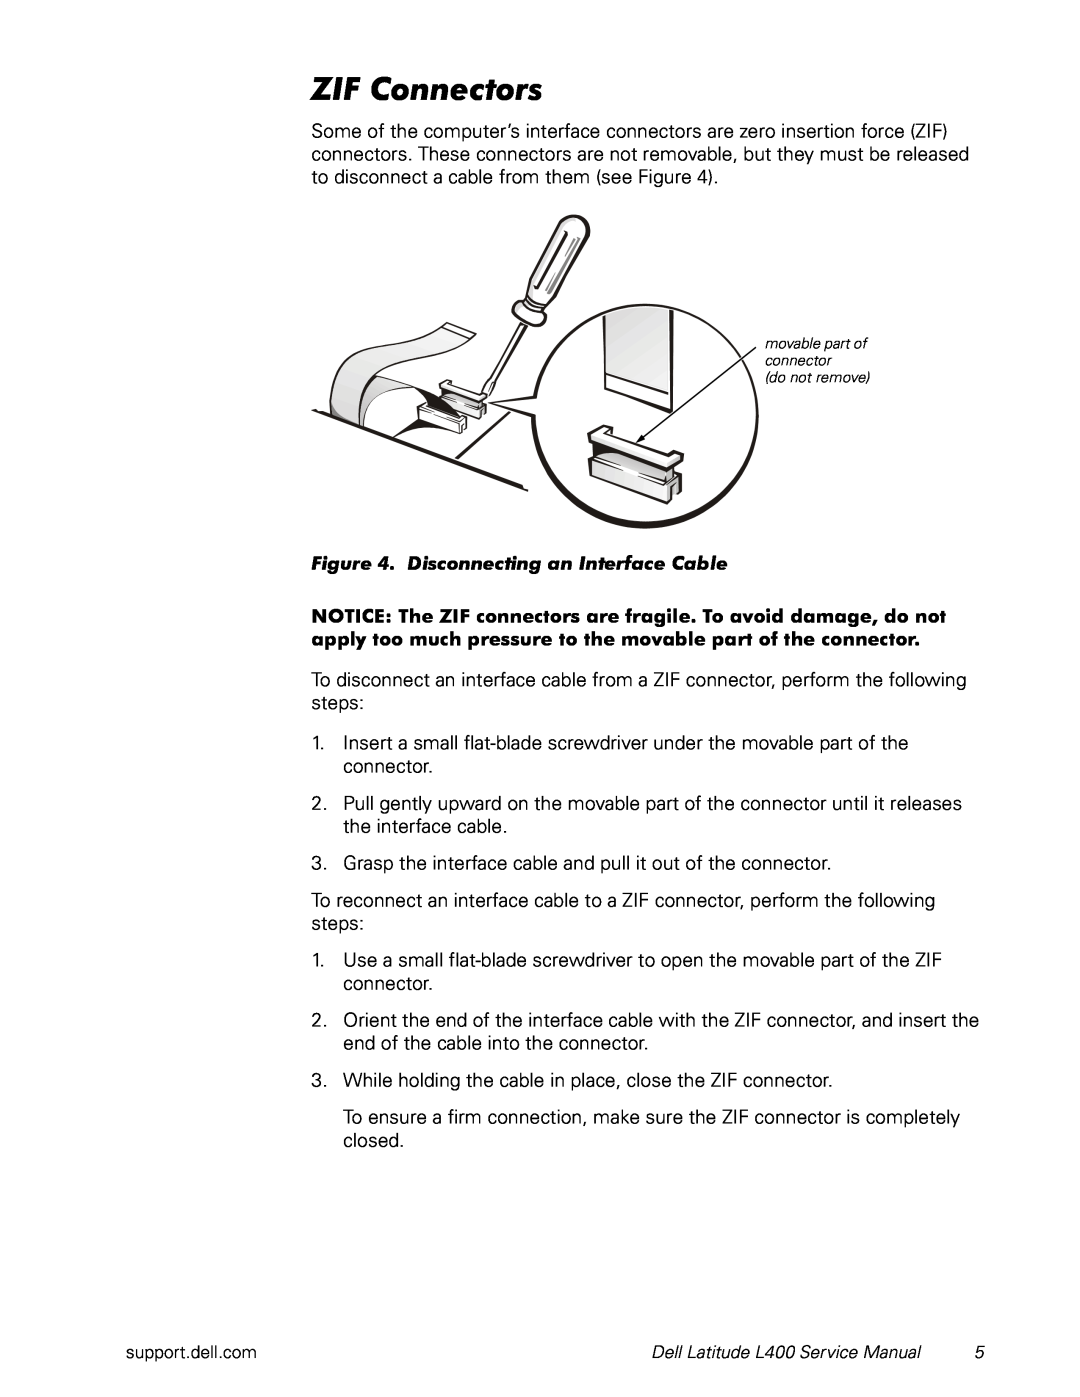 Dell L400 service manual ZIF Connectors, Disconnecting an Interface Cable 